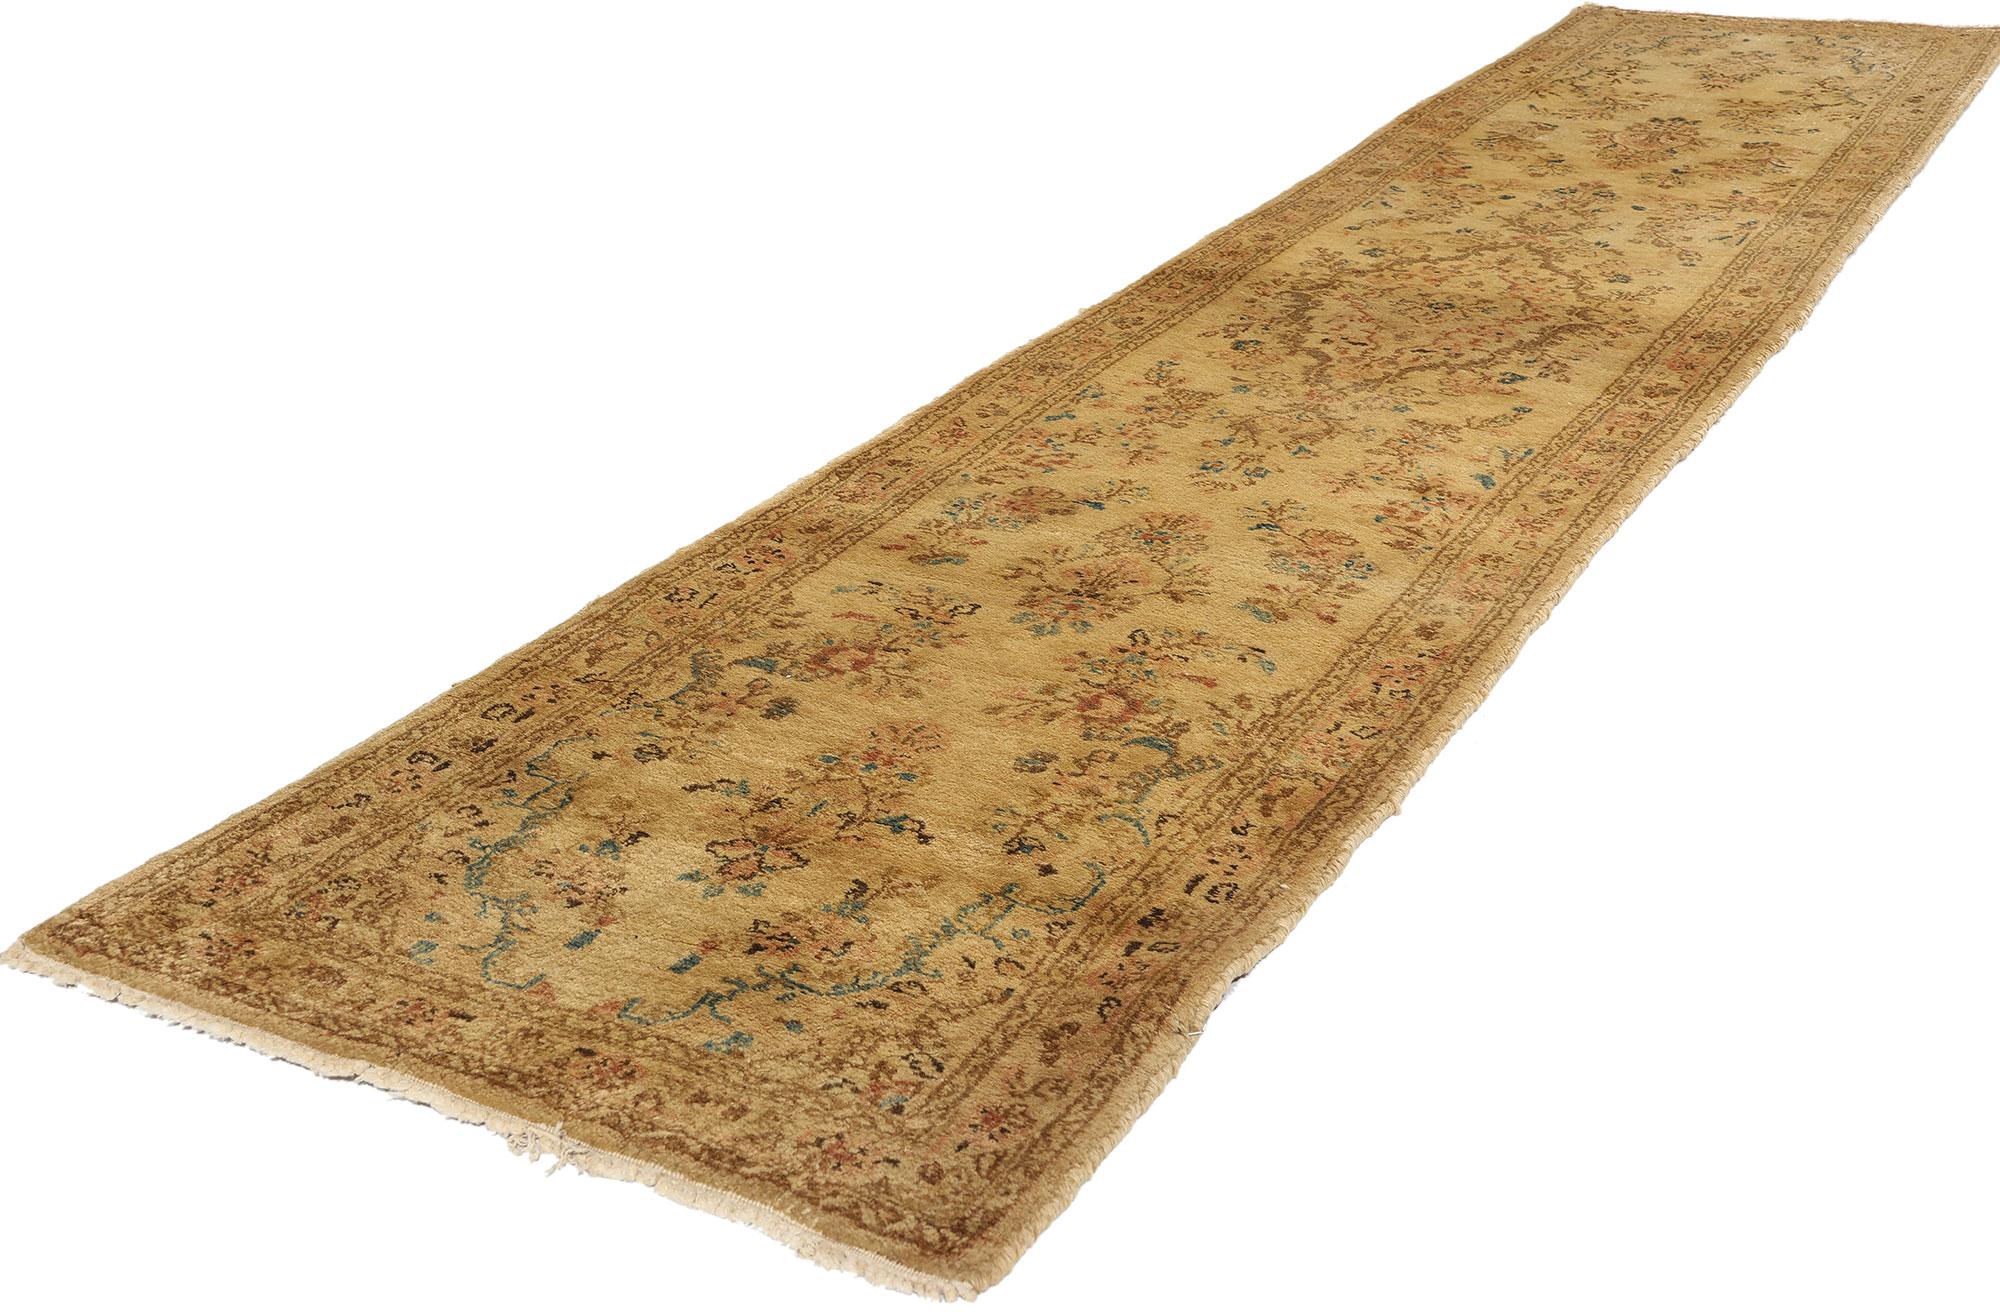 71661 Vintage Neutral Persian Rug Runner, 02’05 x 11’07. Antique-washed Persian Kerman carpet runners are narrow rugs with a long length, typically crafted from high-quality wool and featuring intricate designs. These Persian rugs undergo an